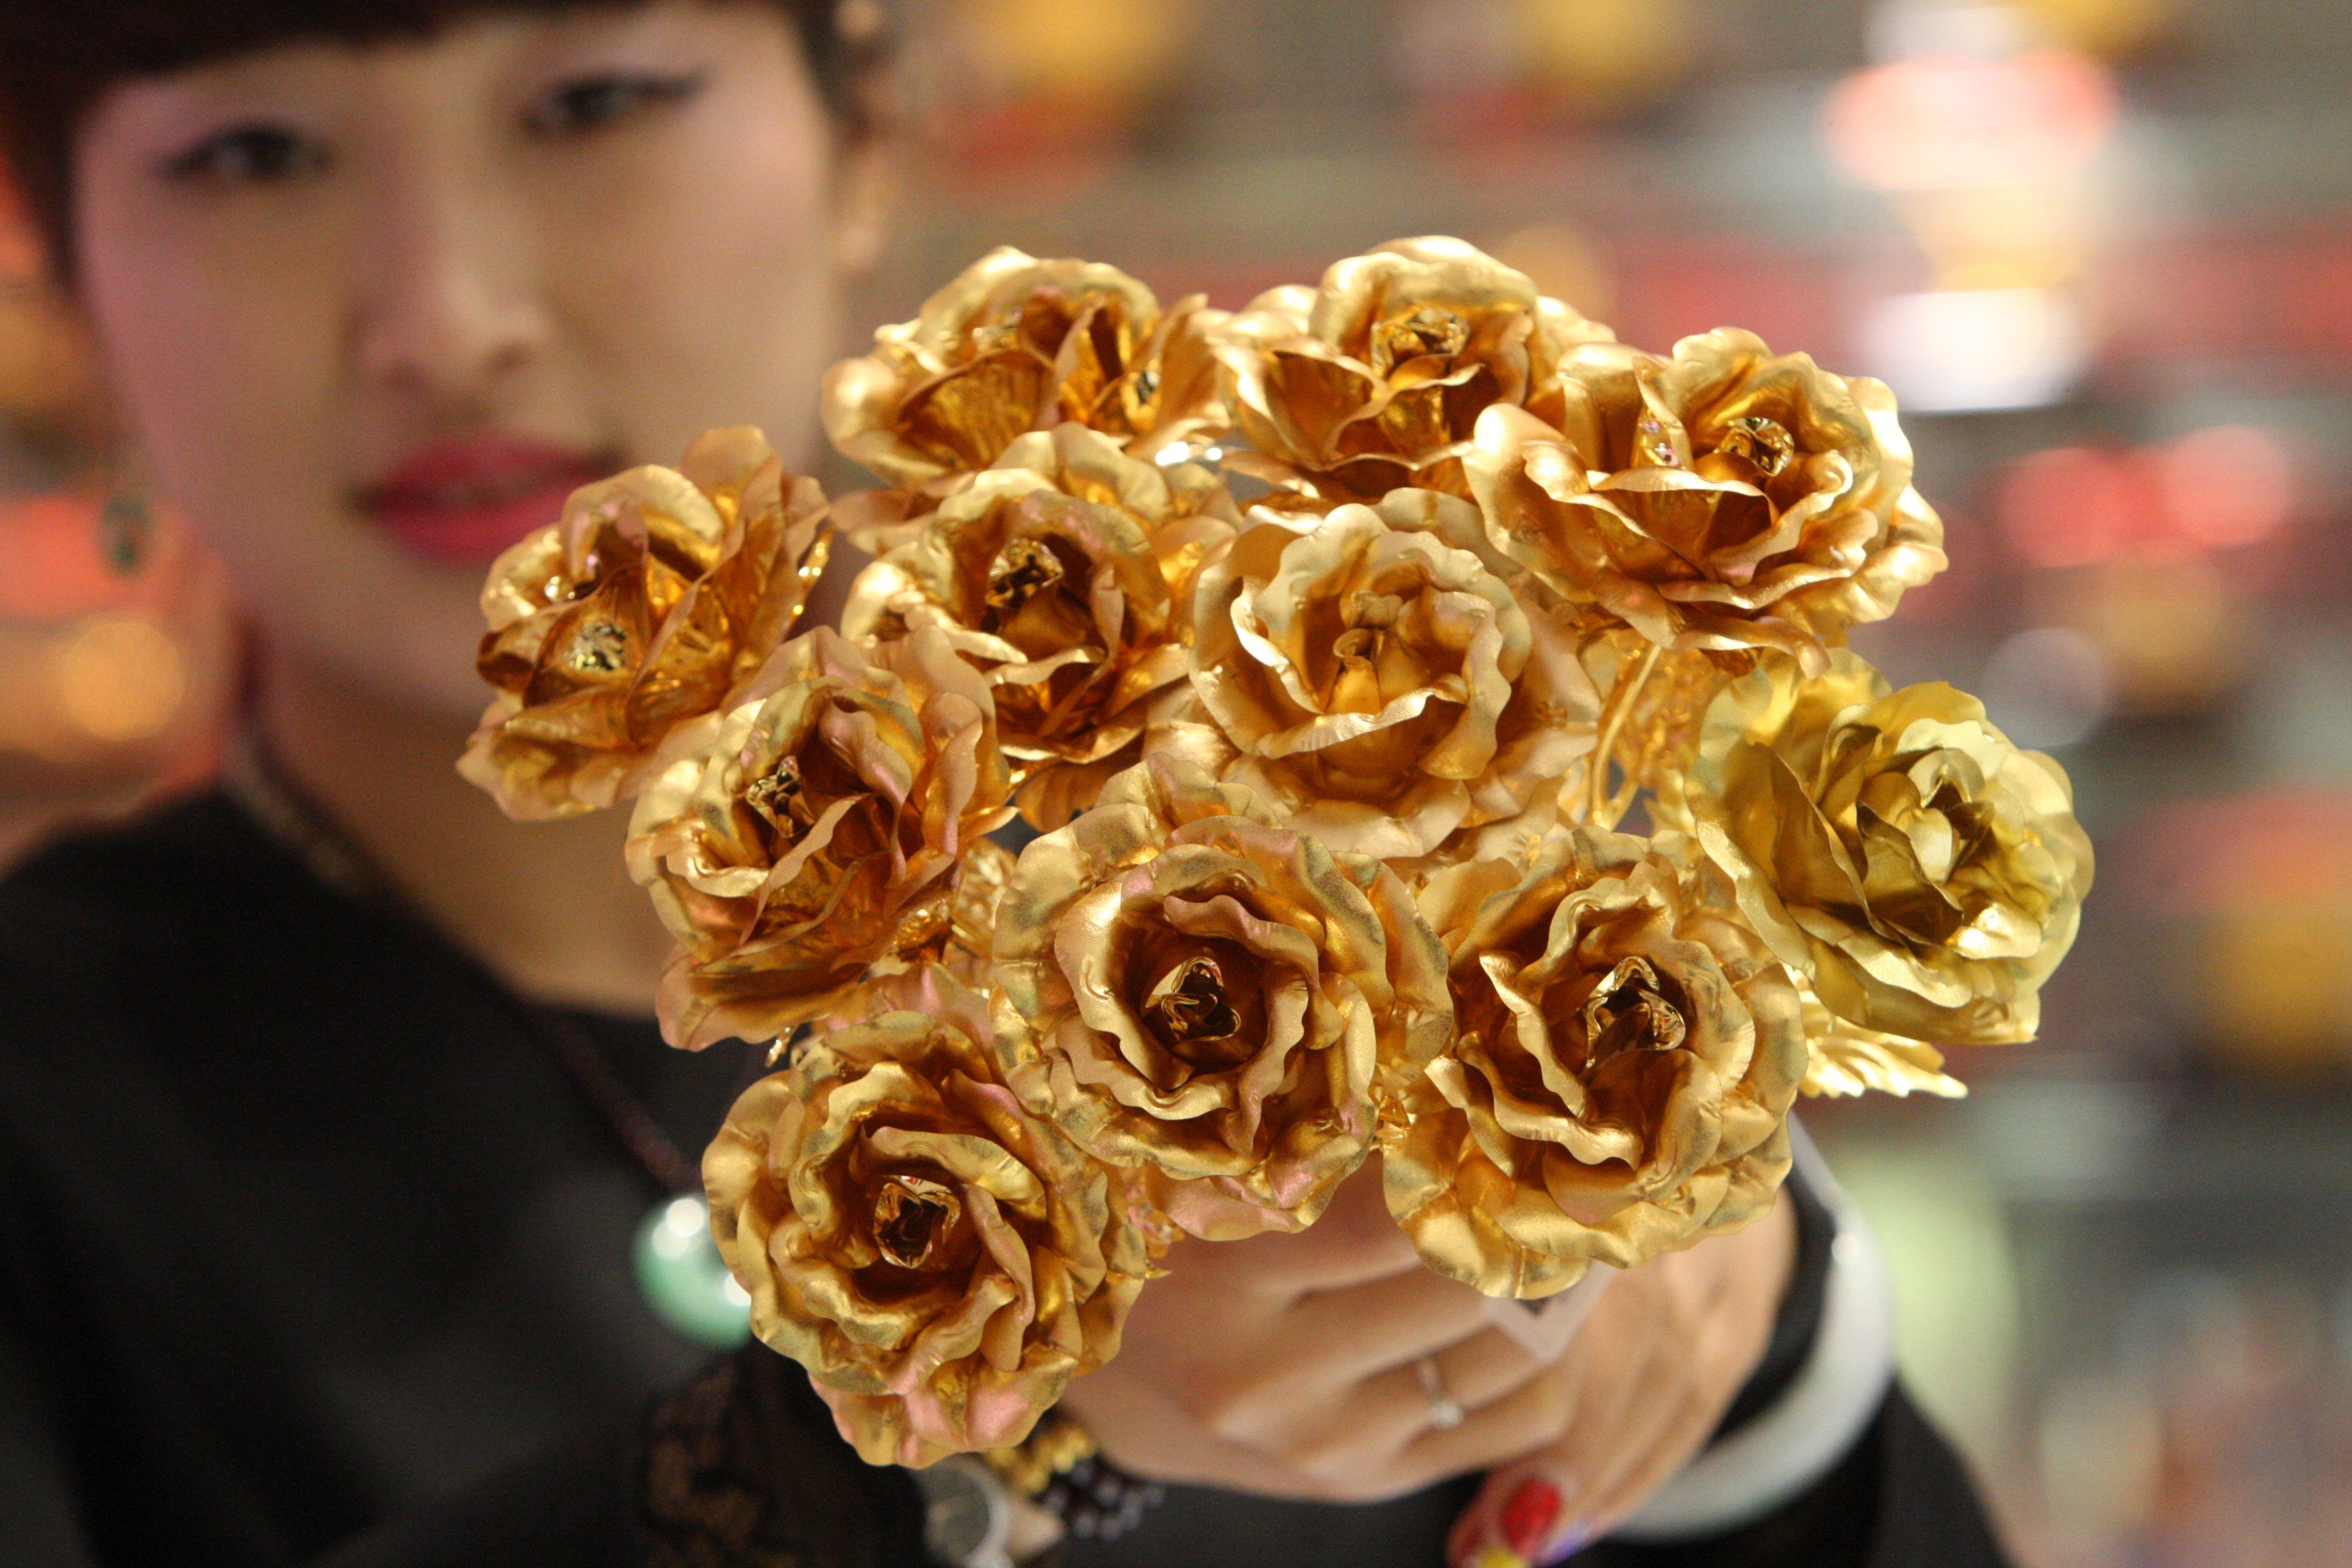 A worker shows off gold foil roses, a popular Valentine’s Day gift, at a shop in Yantai, in east China’s Shandong province, in February 2016. Chinese consumers tend to have a high appetite for the noble metal. Photo: Xinhua